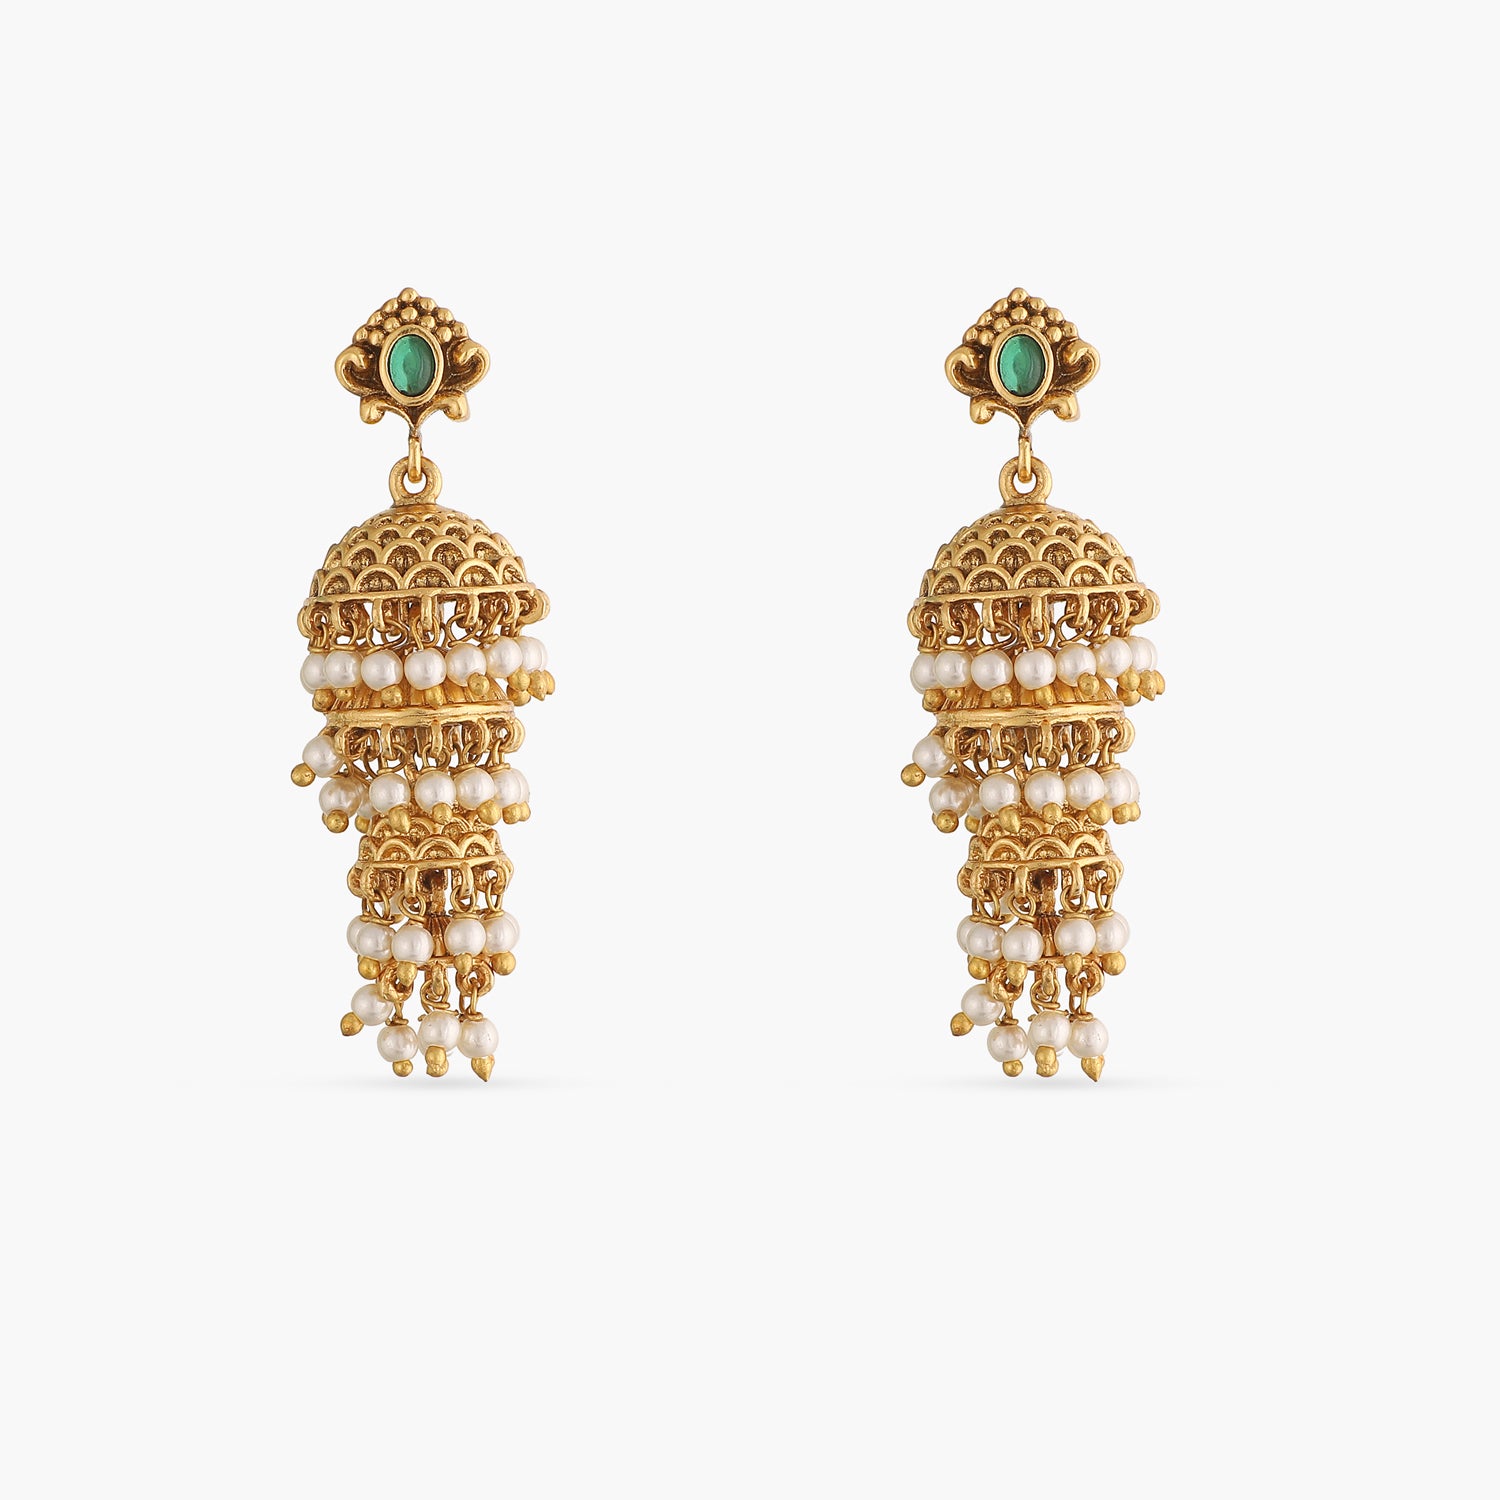 Discover more than 196 real gold jhumka earrings best